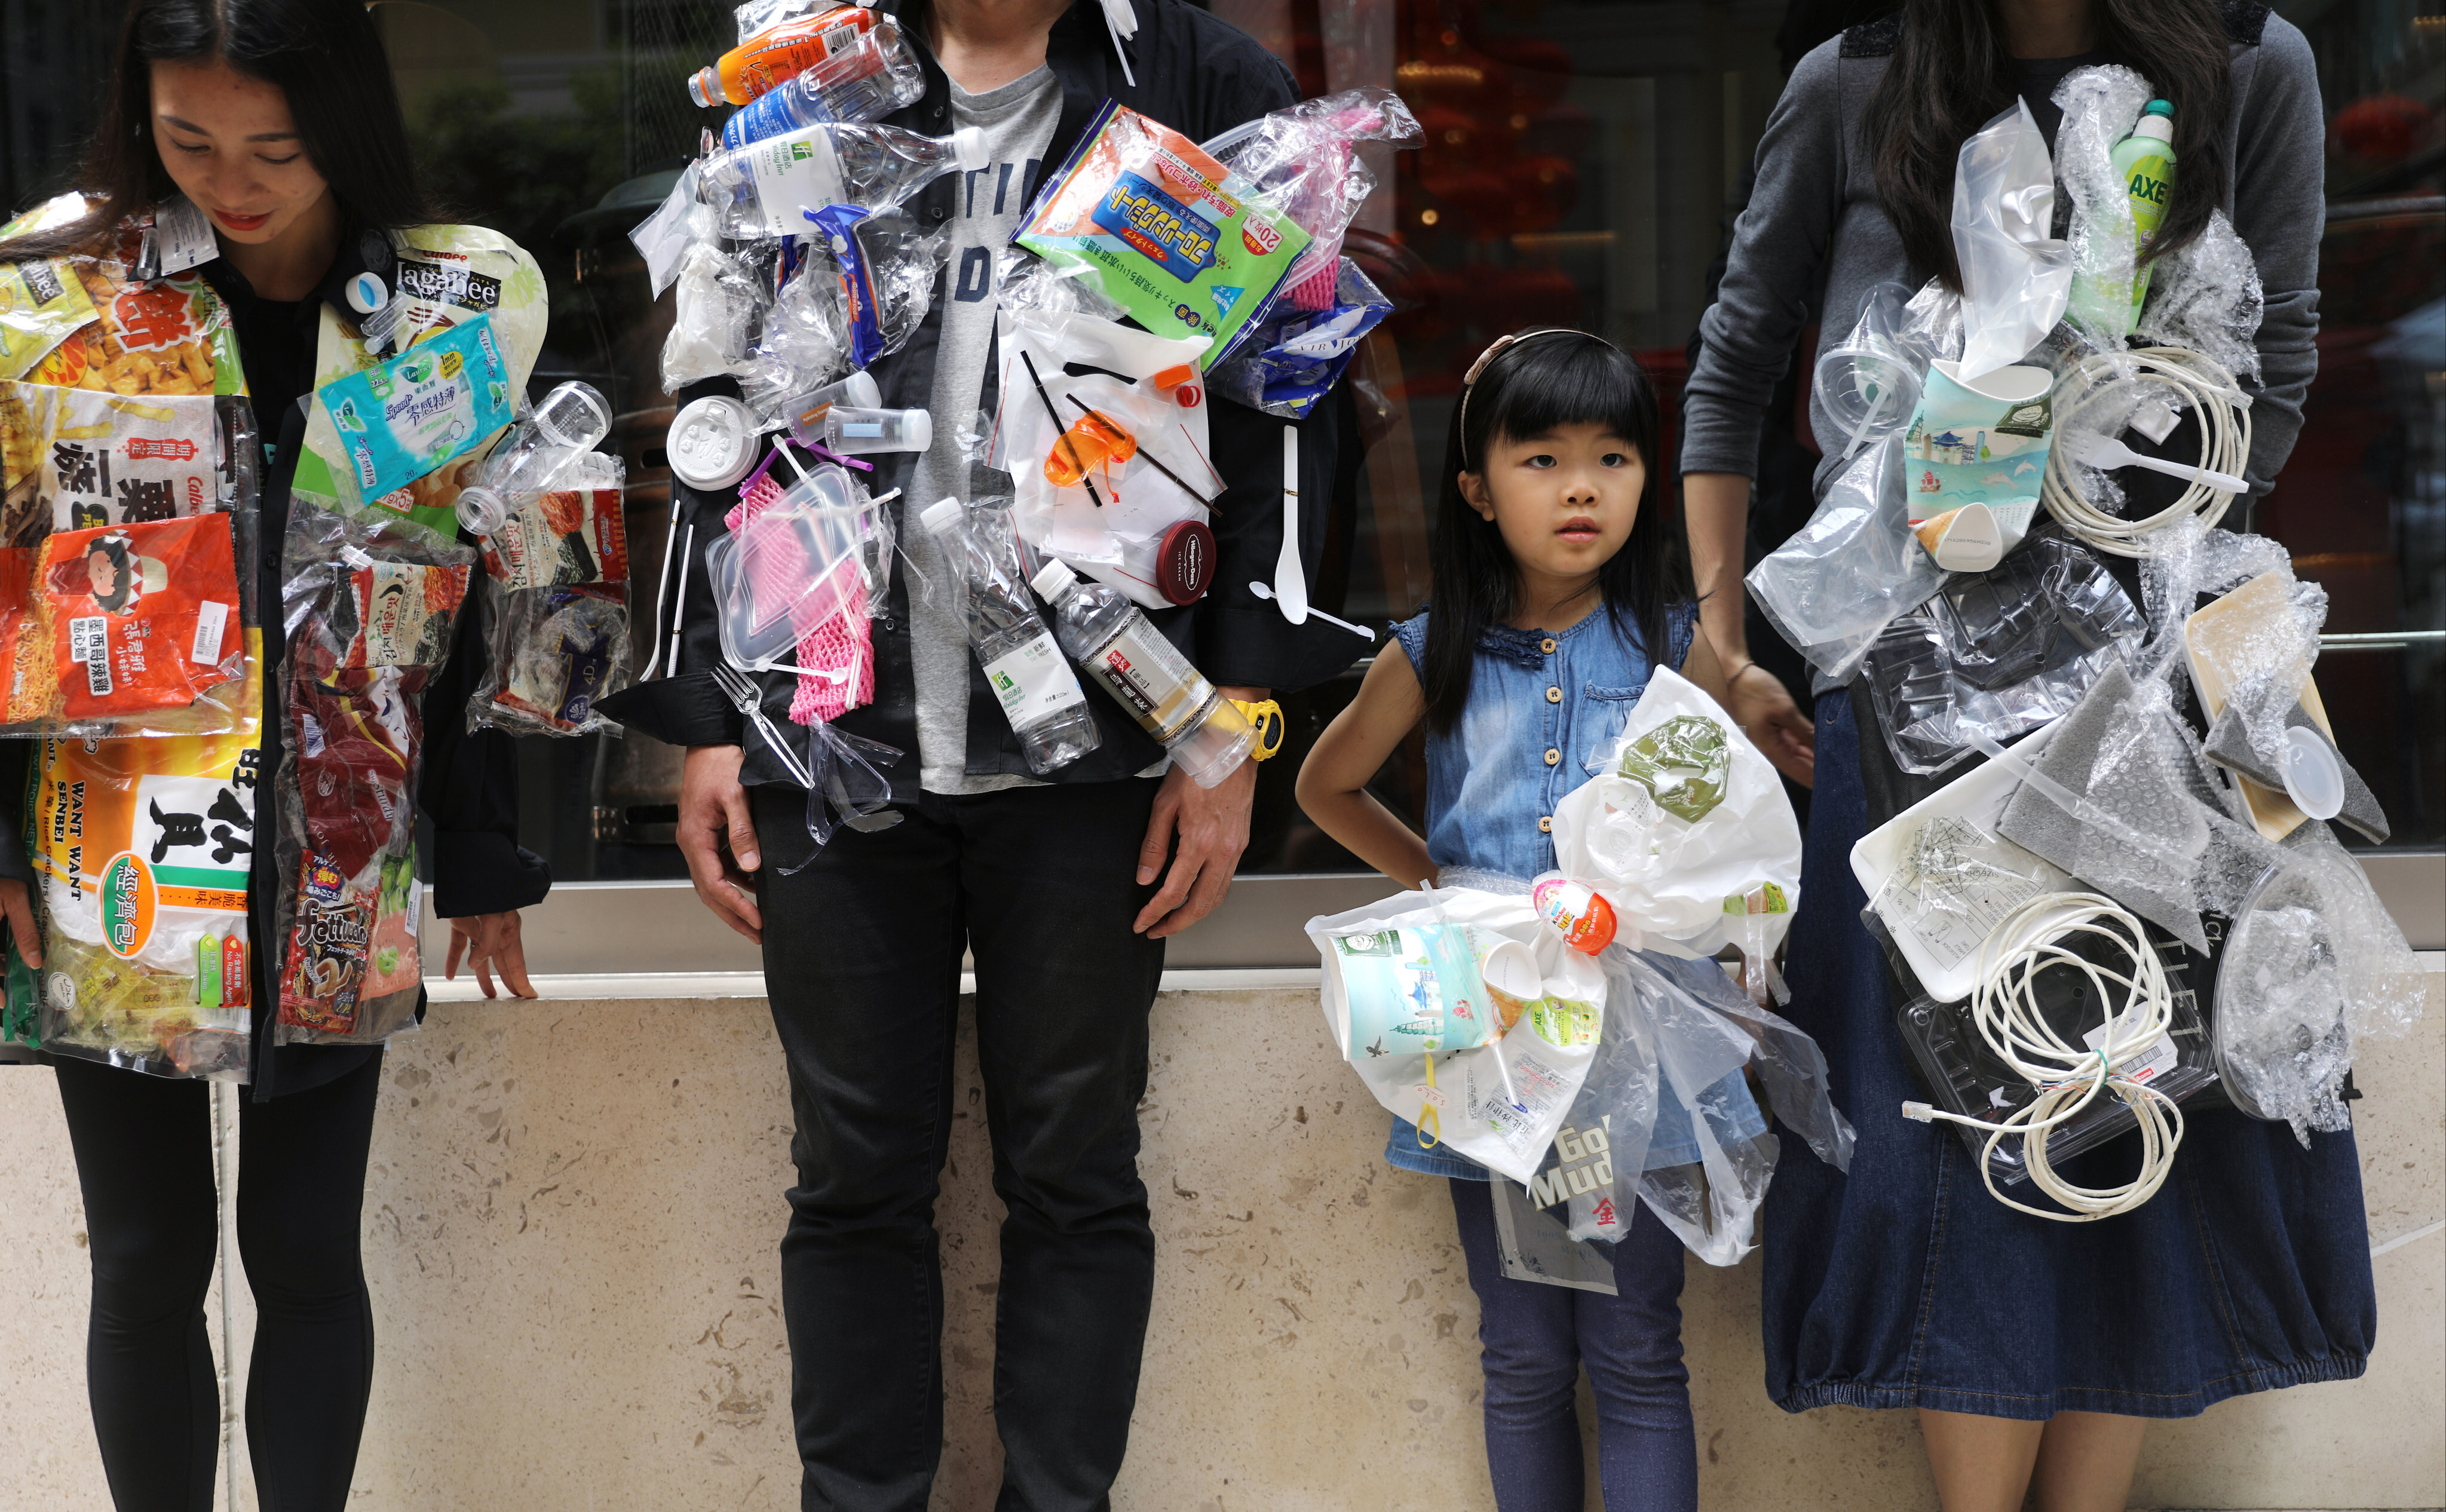 An appeal to end plastic pollution, in Wan Chai, Hong Kong, on April 22, 2018. The last thing we want is to burden future generations with our mess. Photo: Sam Tsang